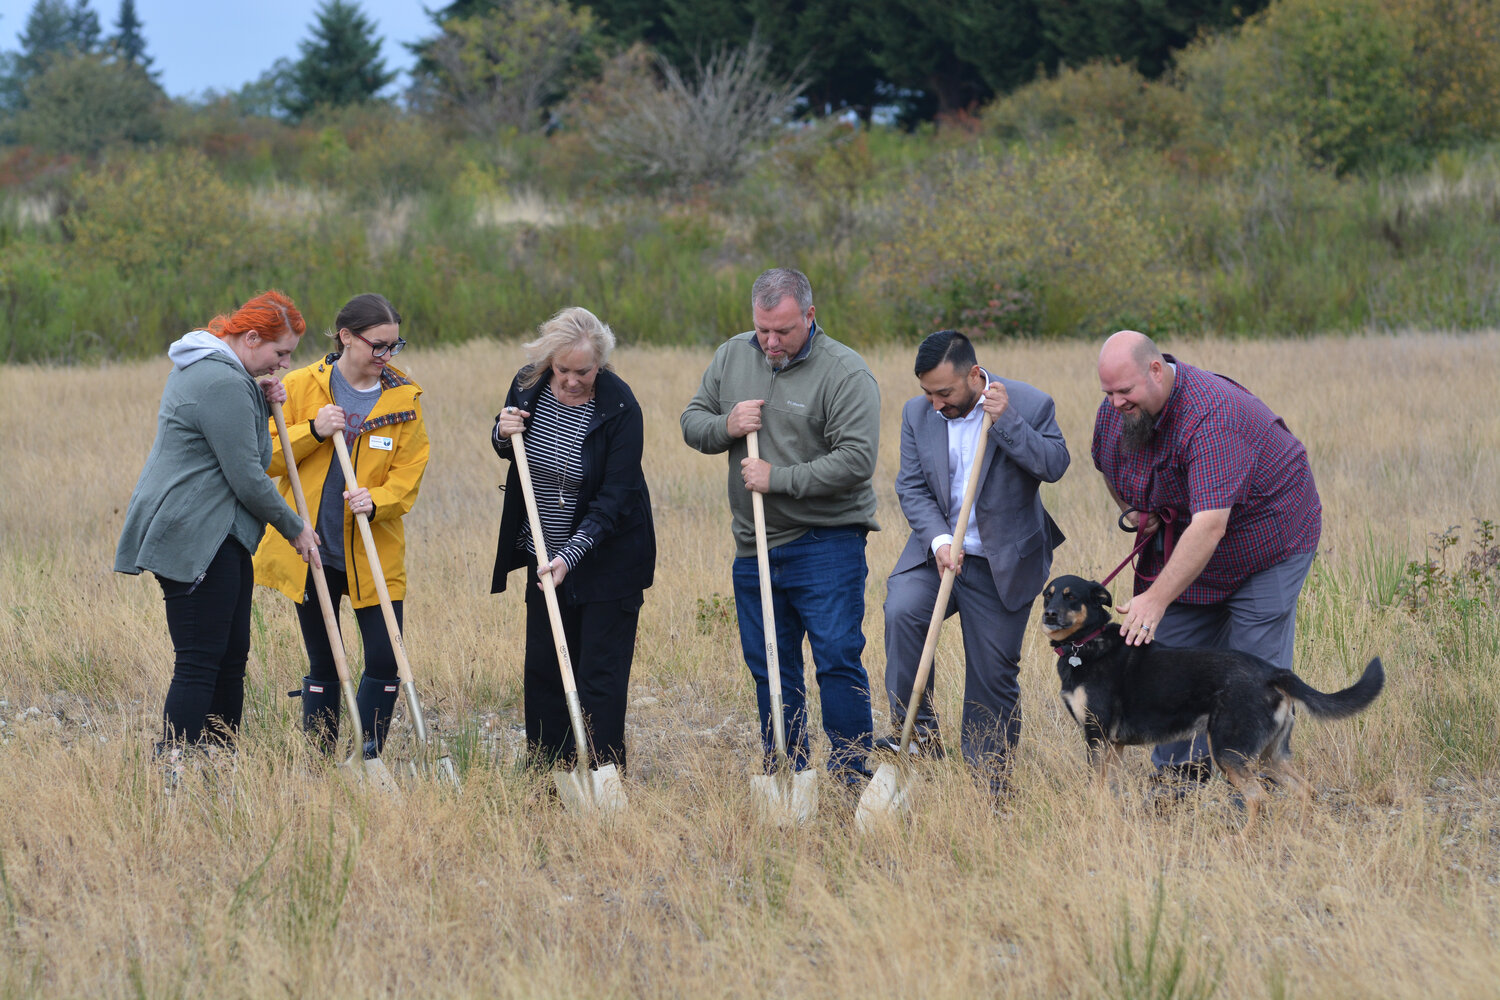 Representatives from the City of Yelm broke ground at the incoming dog park on Sept. 25.